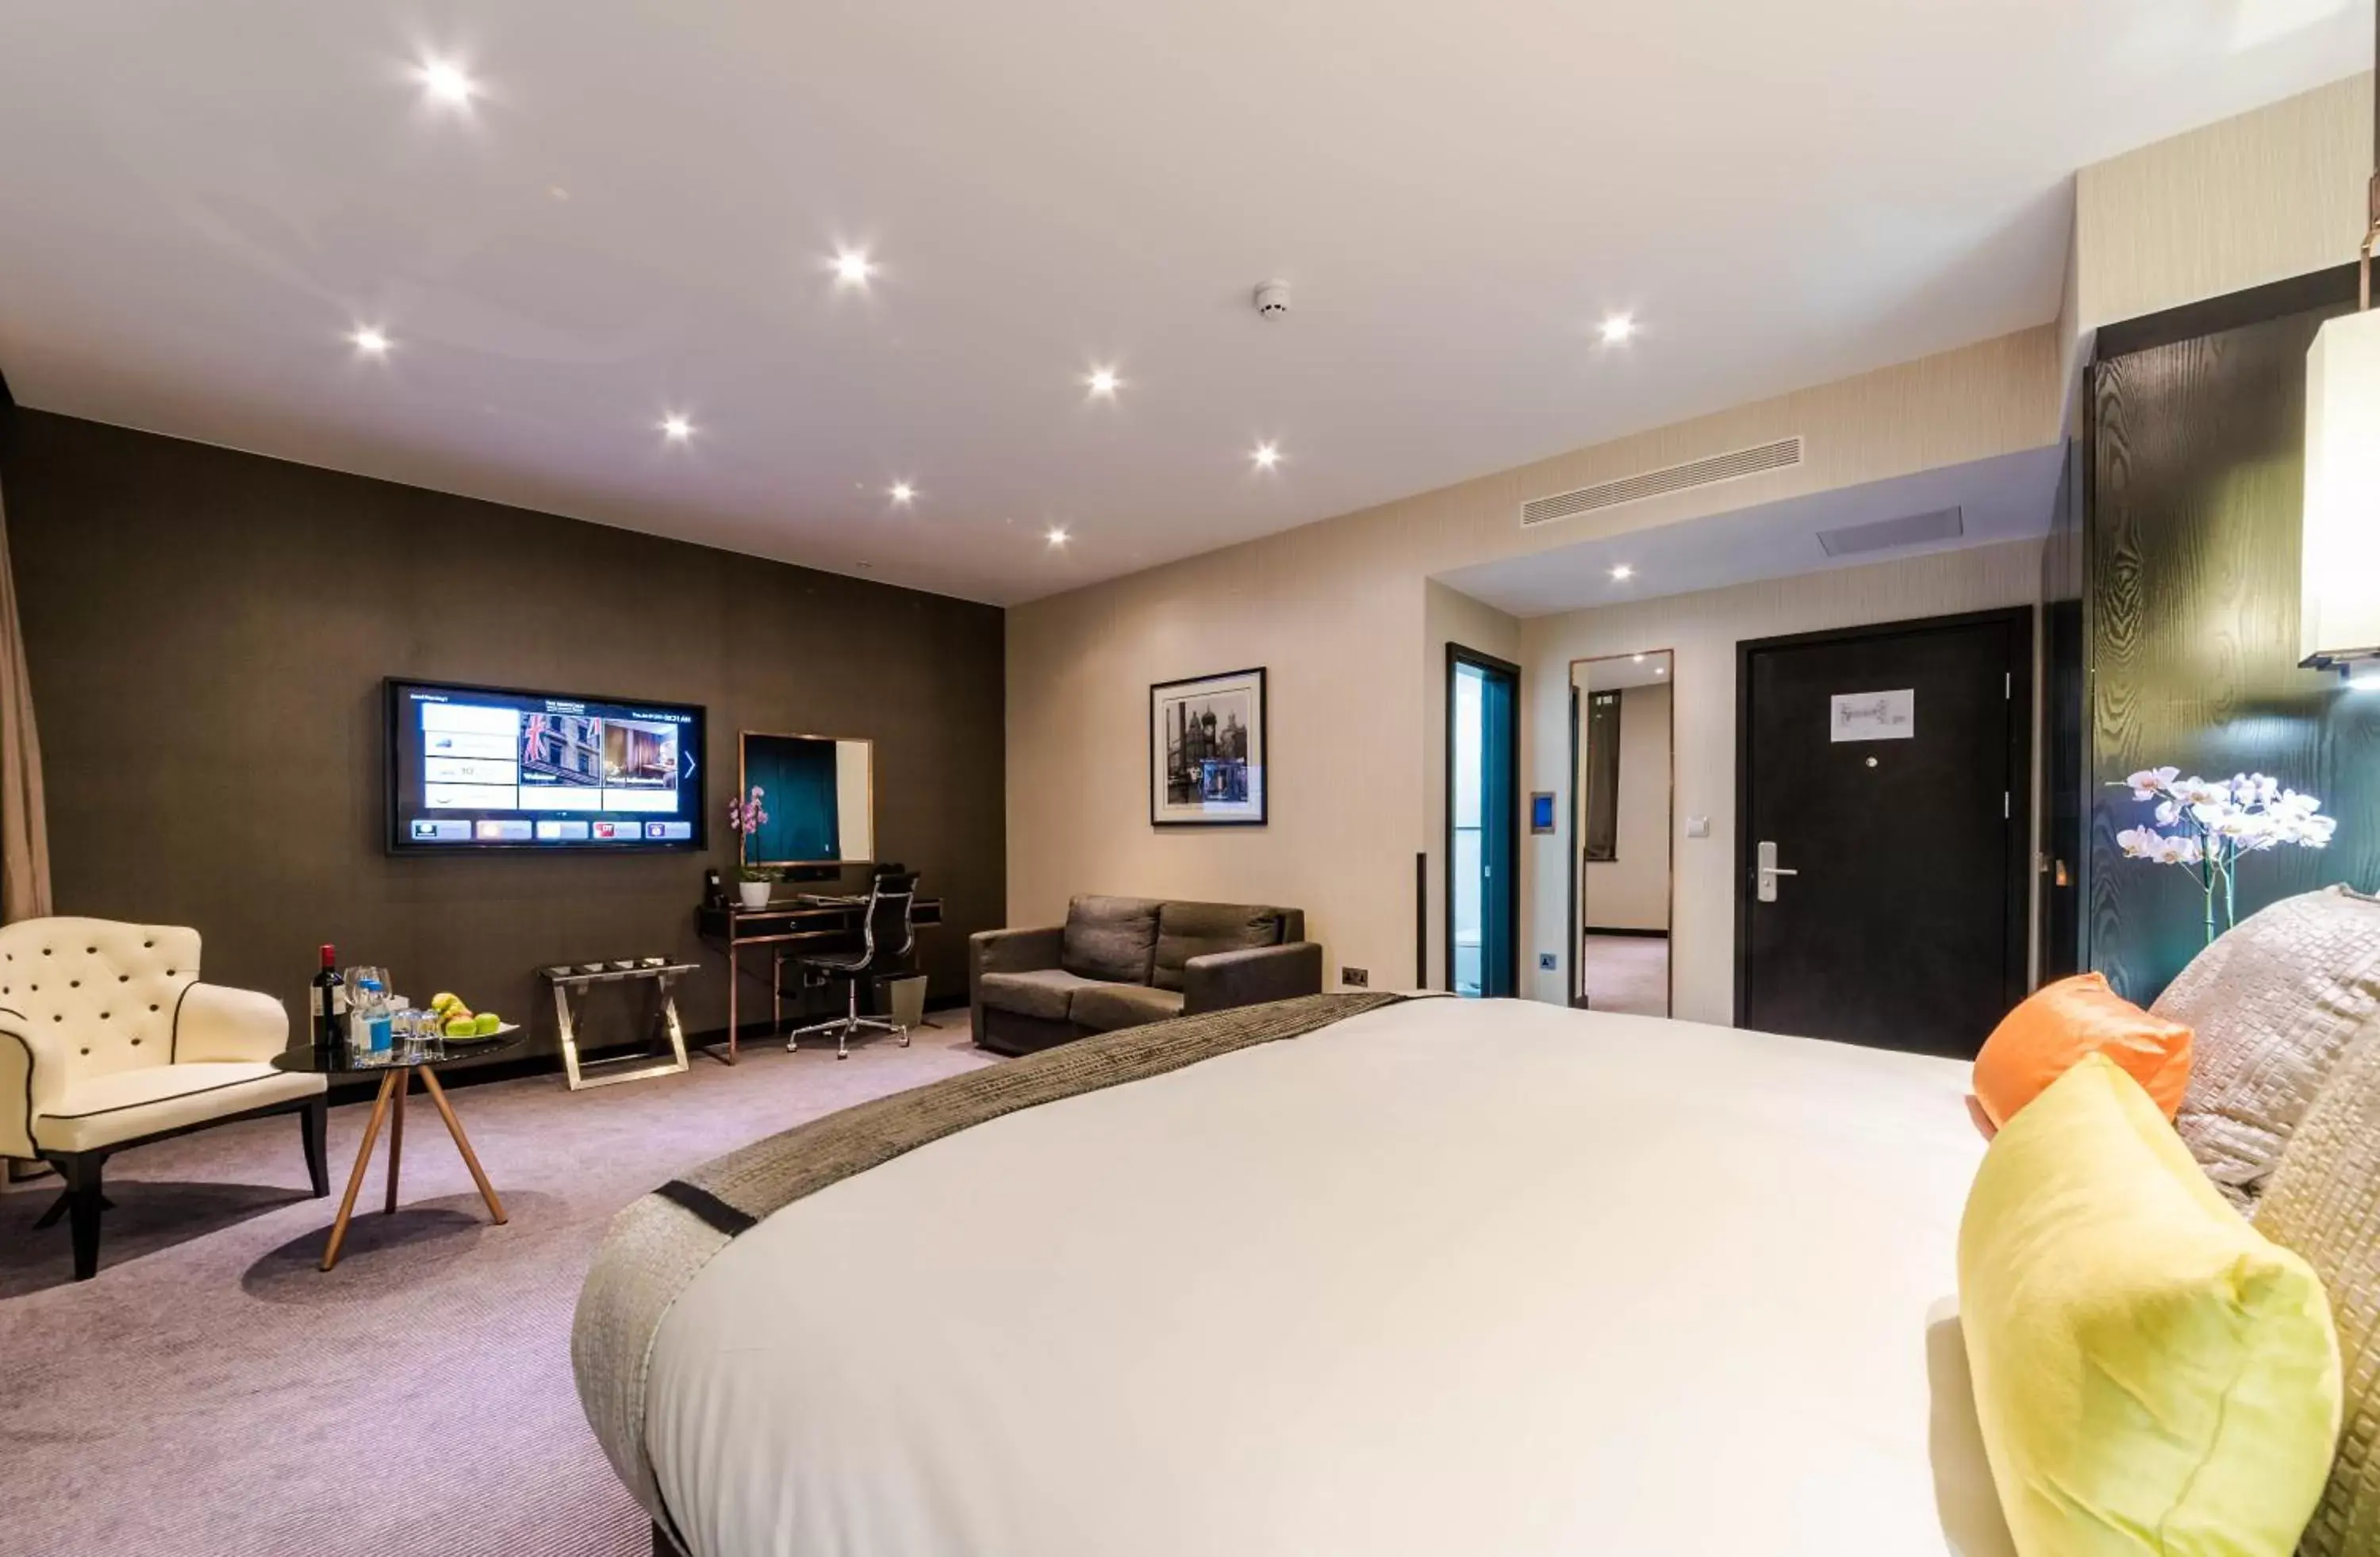 TV and multimedia in Montcalm Royal London House-City of London